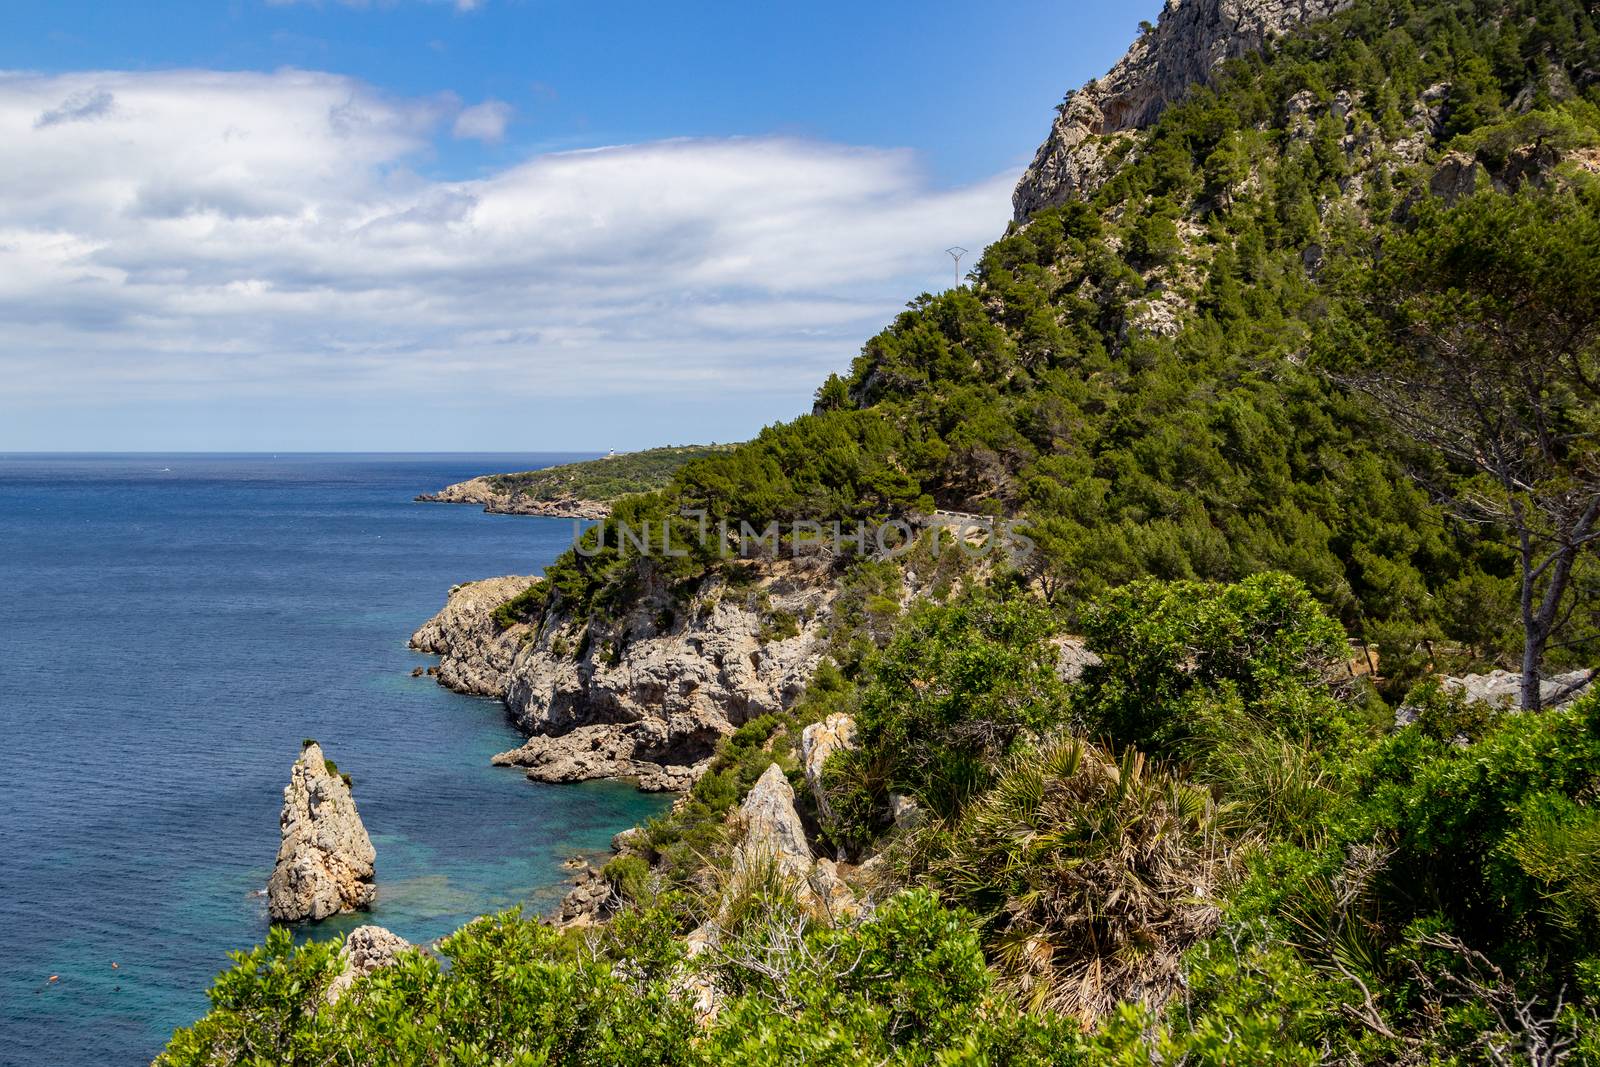 Bay Ses Caletes on the peninsula La Victoria, Mallorca with rocky coastline and turquoise clear water